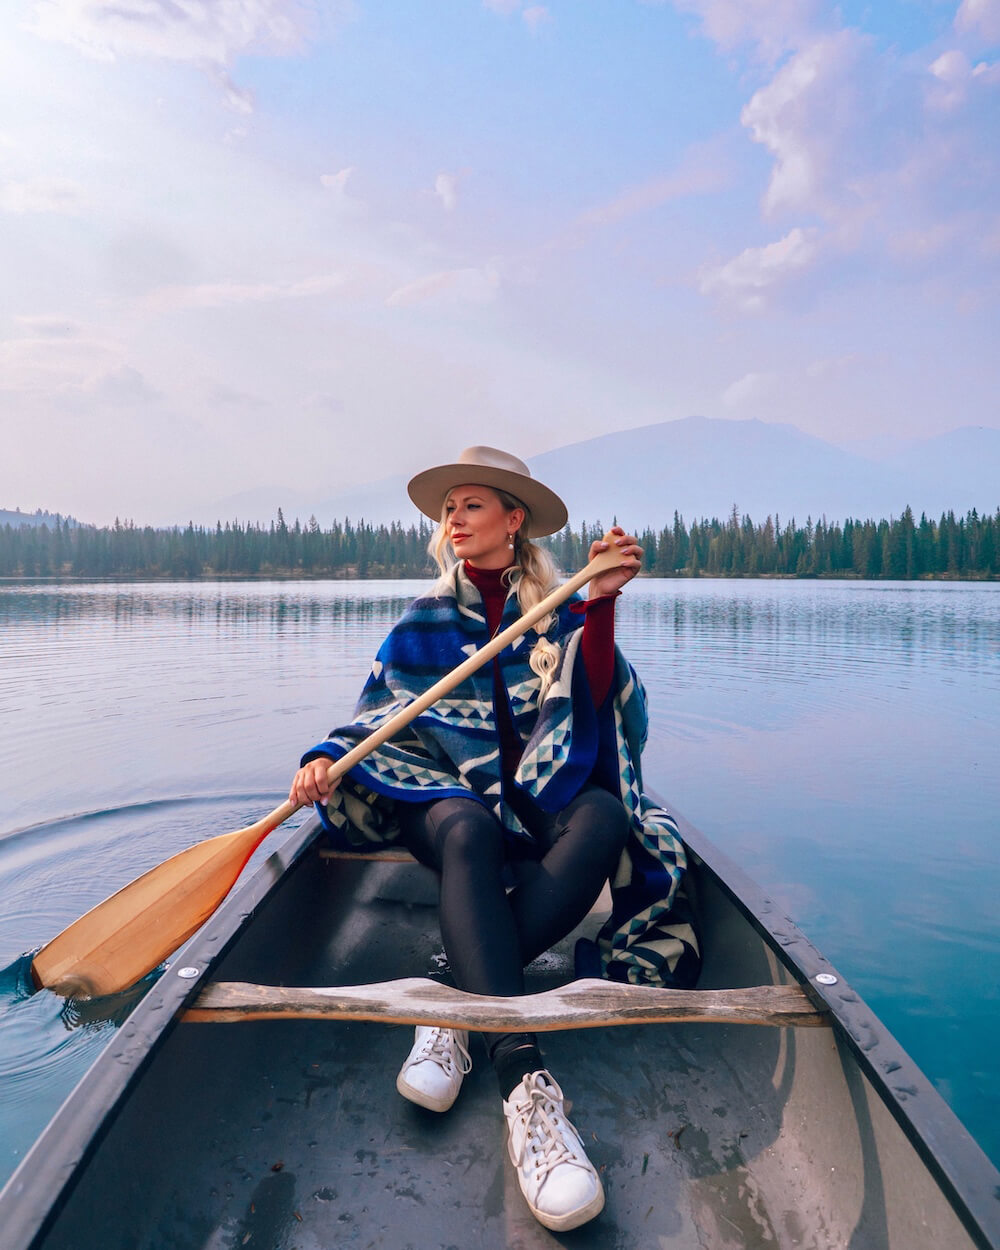 Planning a trip to Jasper National Park soon? Here's a local's guide to some of the best things to do in Jasper. From hikes and trails to adventure sports, family friendly excursions, dining experiences and more. You won't want to miss this guide of the best things to do and places to see in Jasper. Pictured here: Canoeing on Lac Beauvert